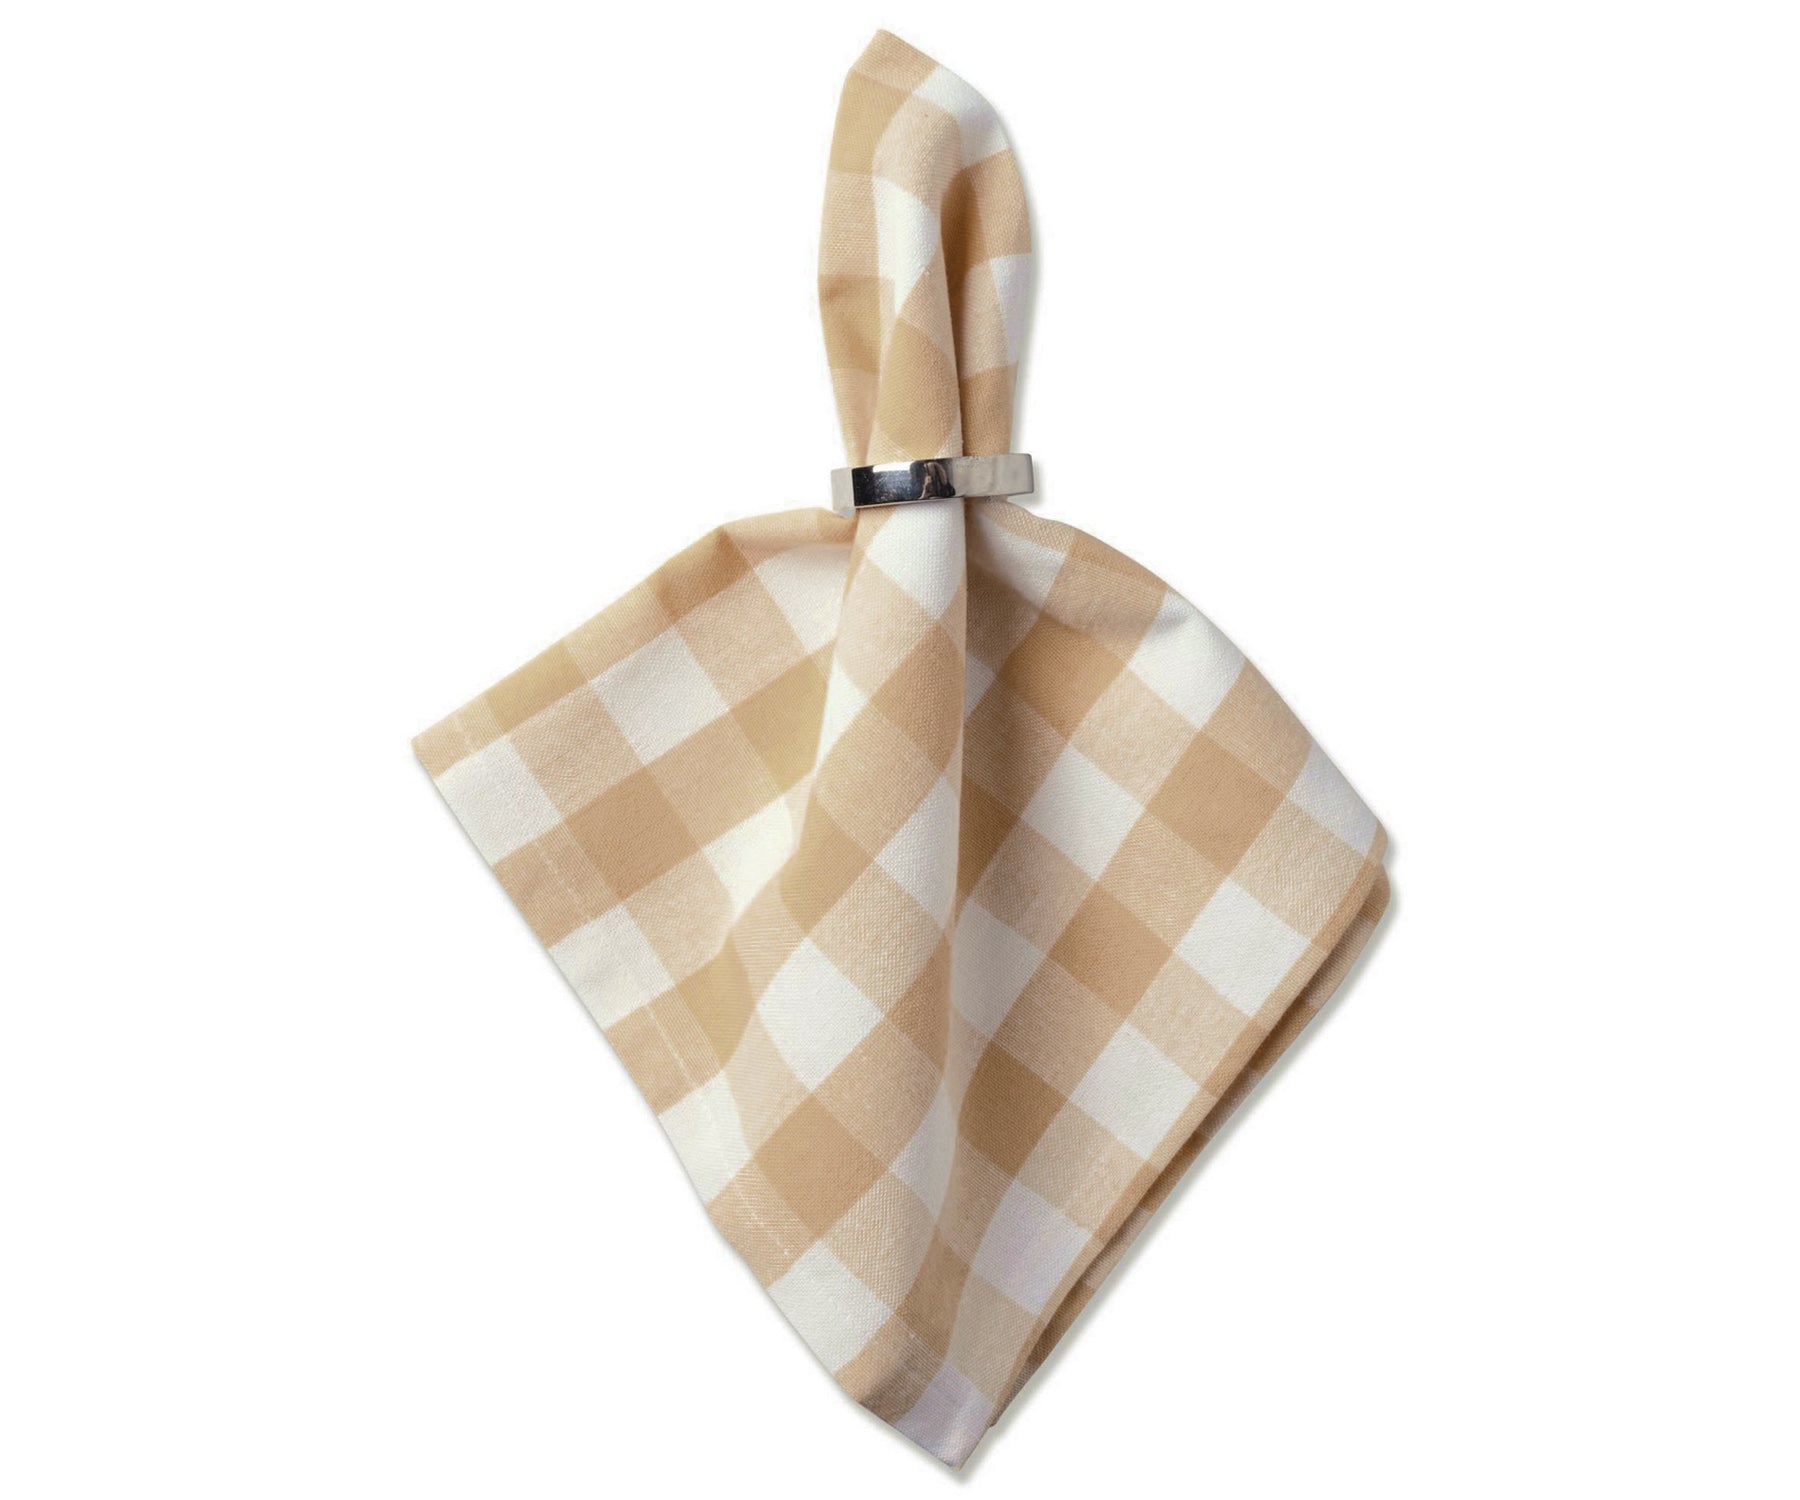 Plaid napkins, a pop of pattern and color for your dining table.